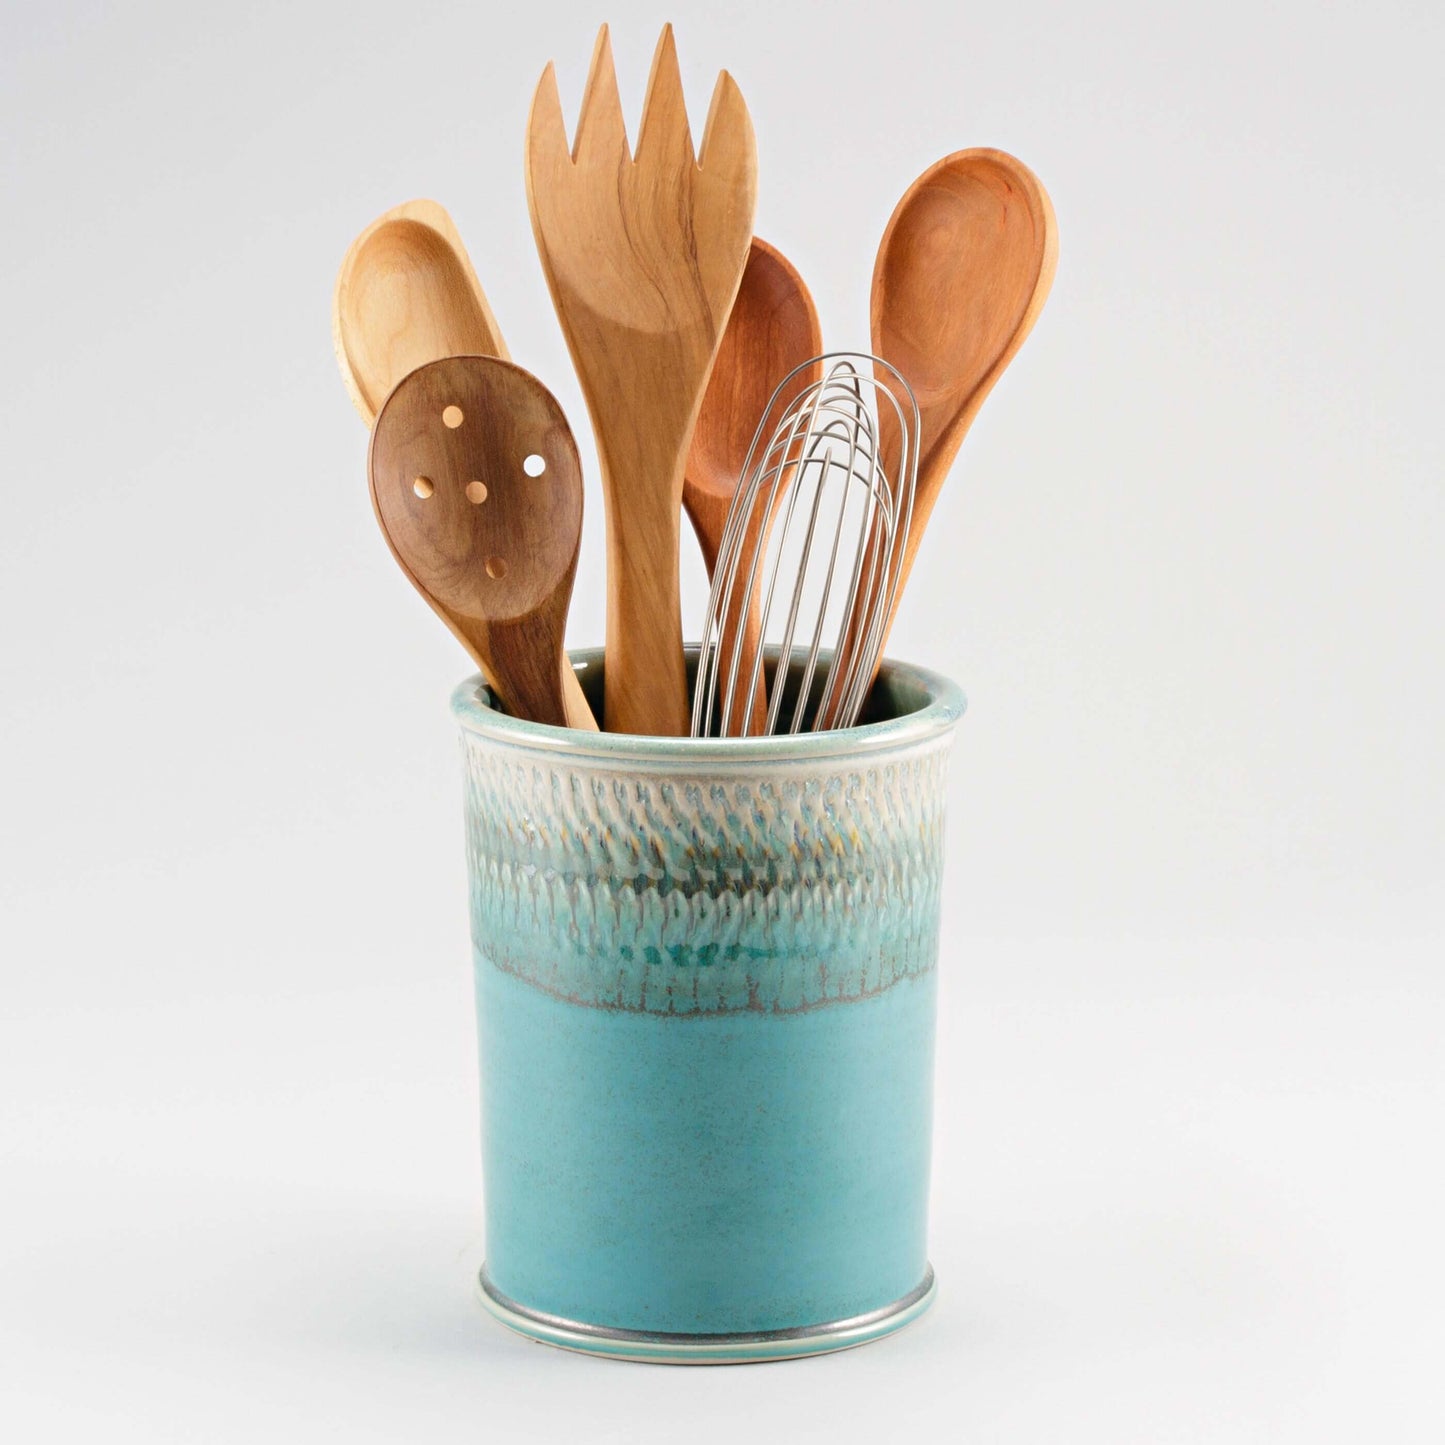 Handmade Pottery Utensil Holder in Green Oribe pattern made by Georgetown Pottery in Maine